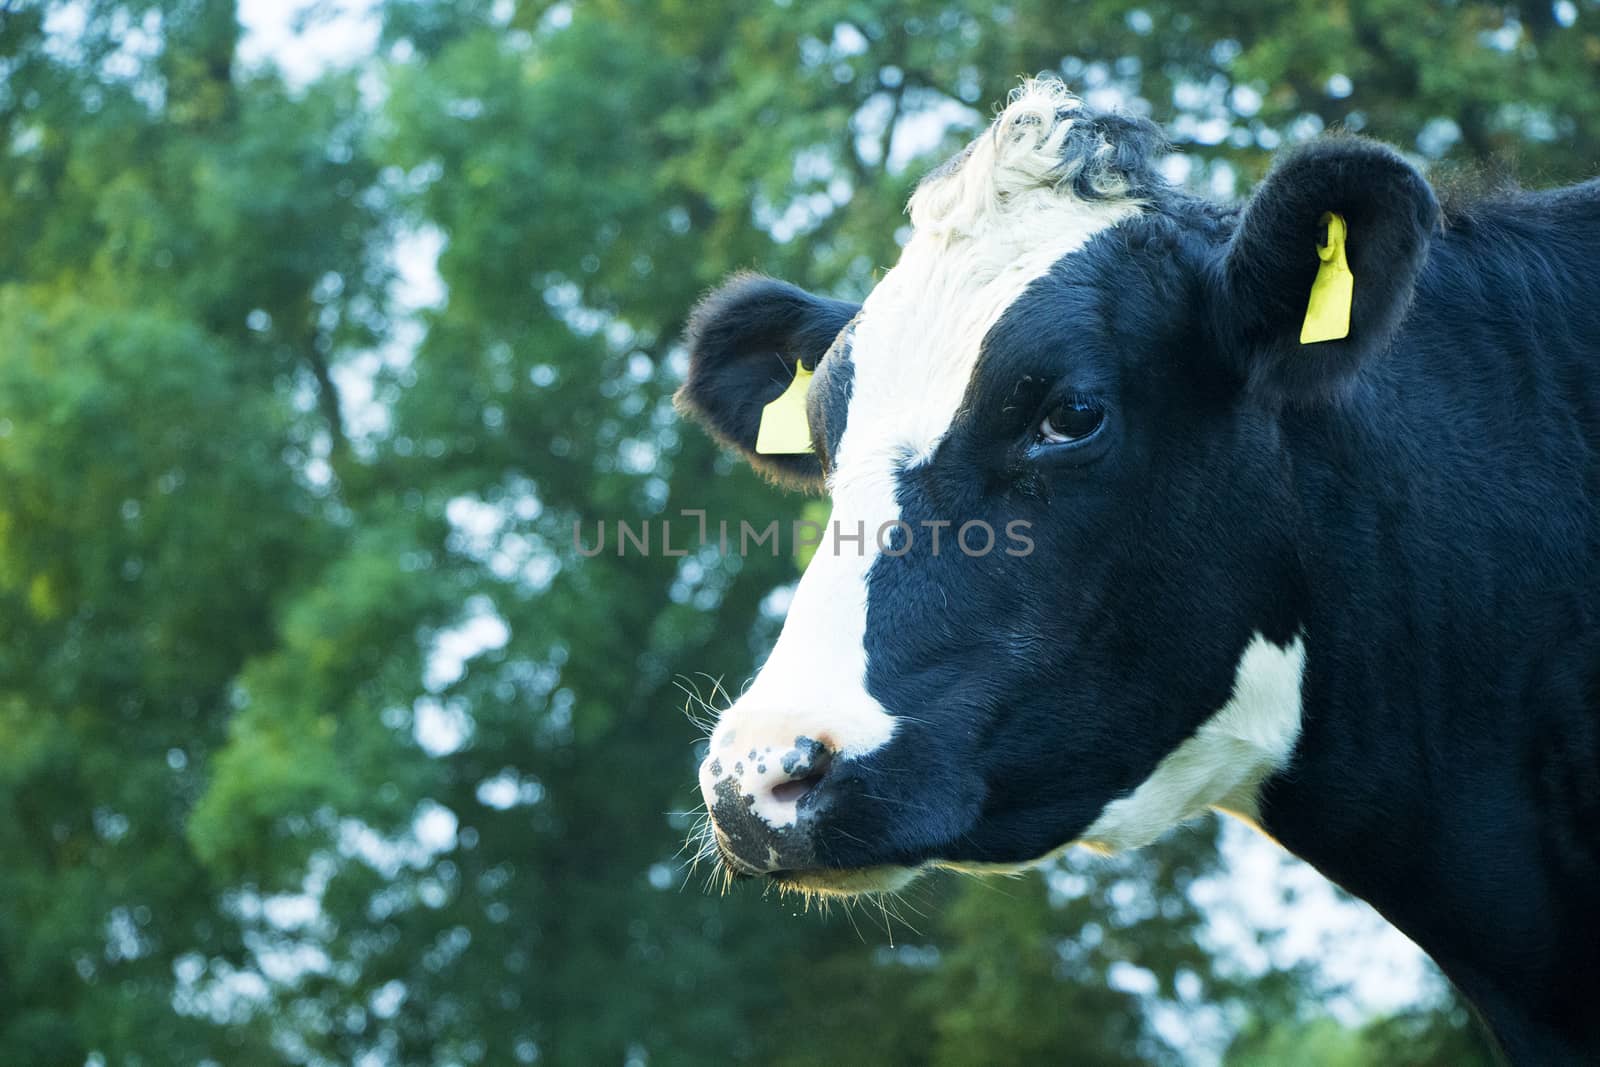 Sad black and white cow standing outdoors on a green grass field.